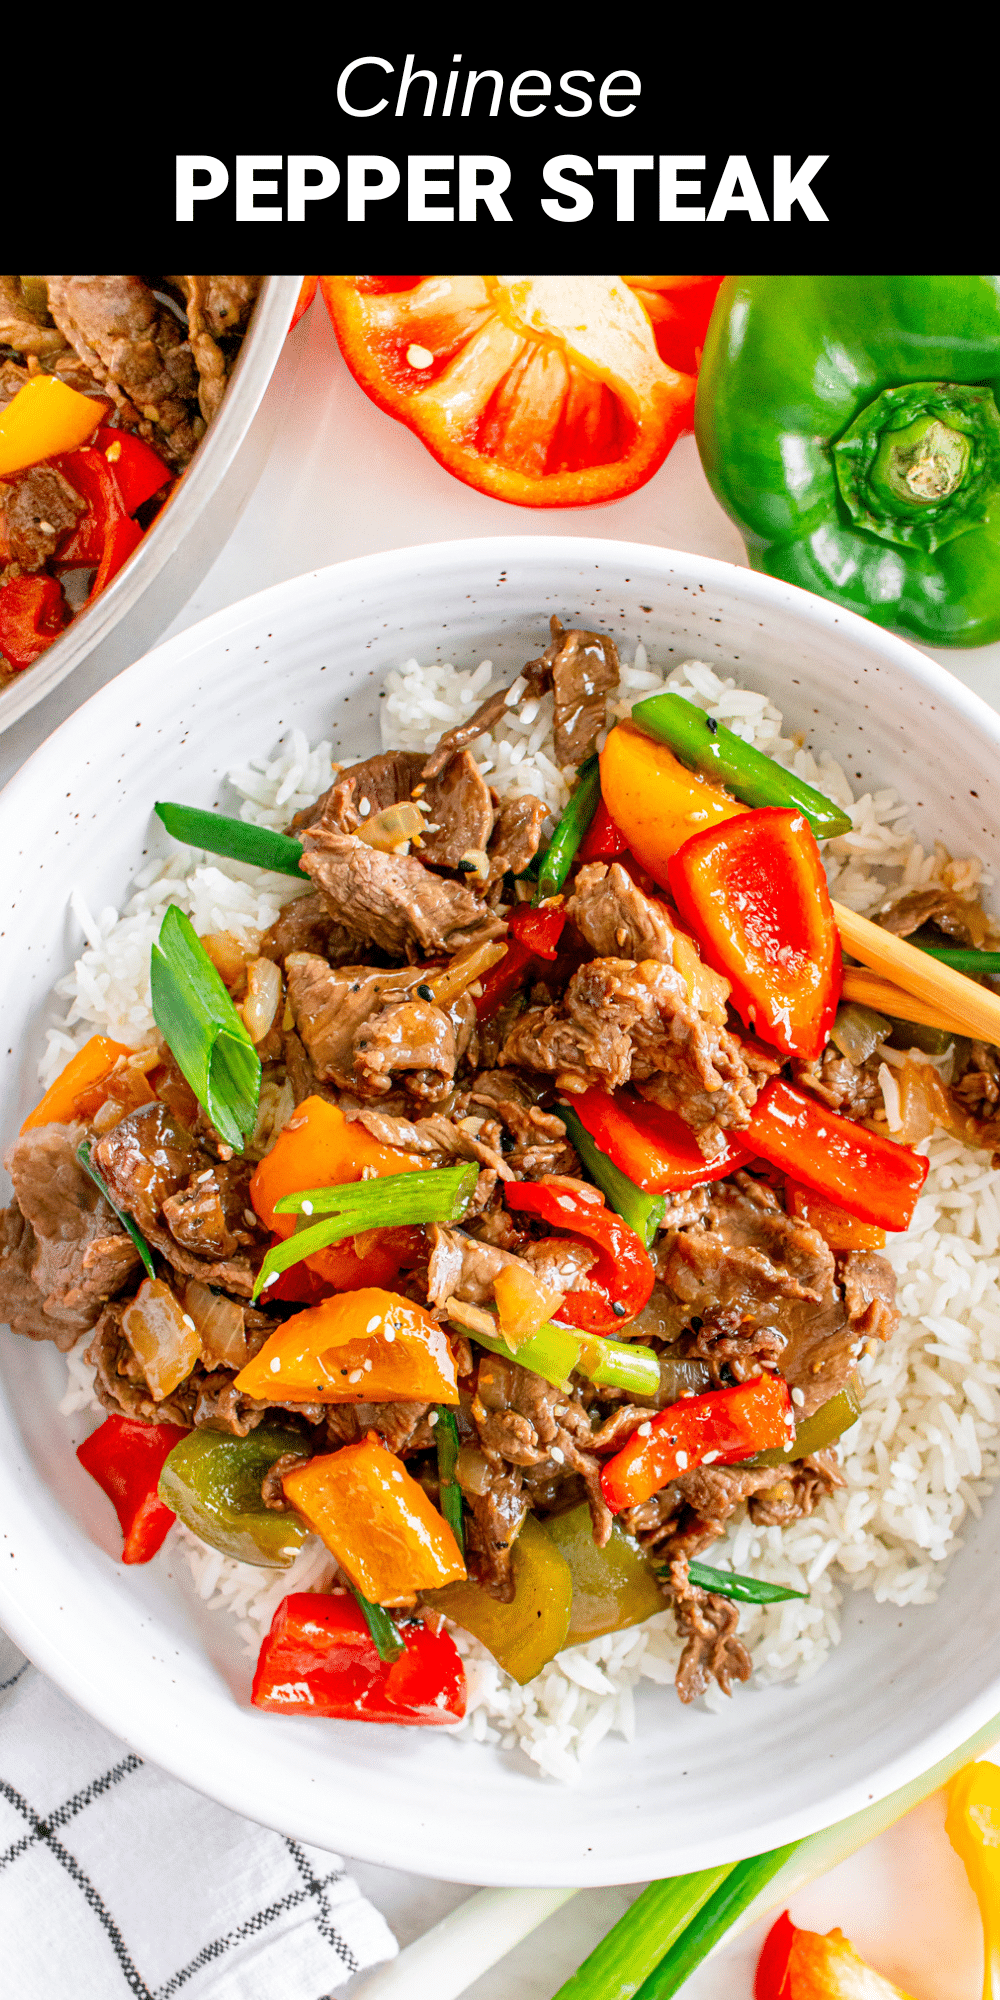 This delicious Chinese Pepper Steak is a quick, budget-friendly alternative to restaurant takeout that doesn't compromise on authentic flavor. Made in just 30 minutes, it’s the perfect answer for a busy weeknight dinner.